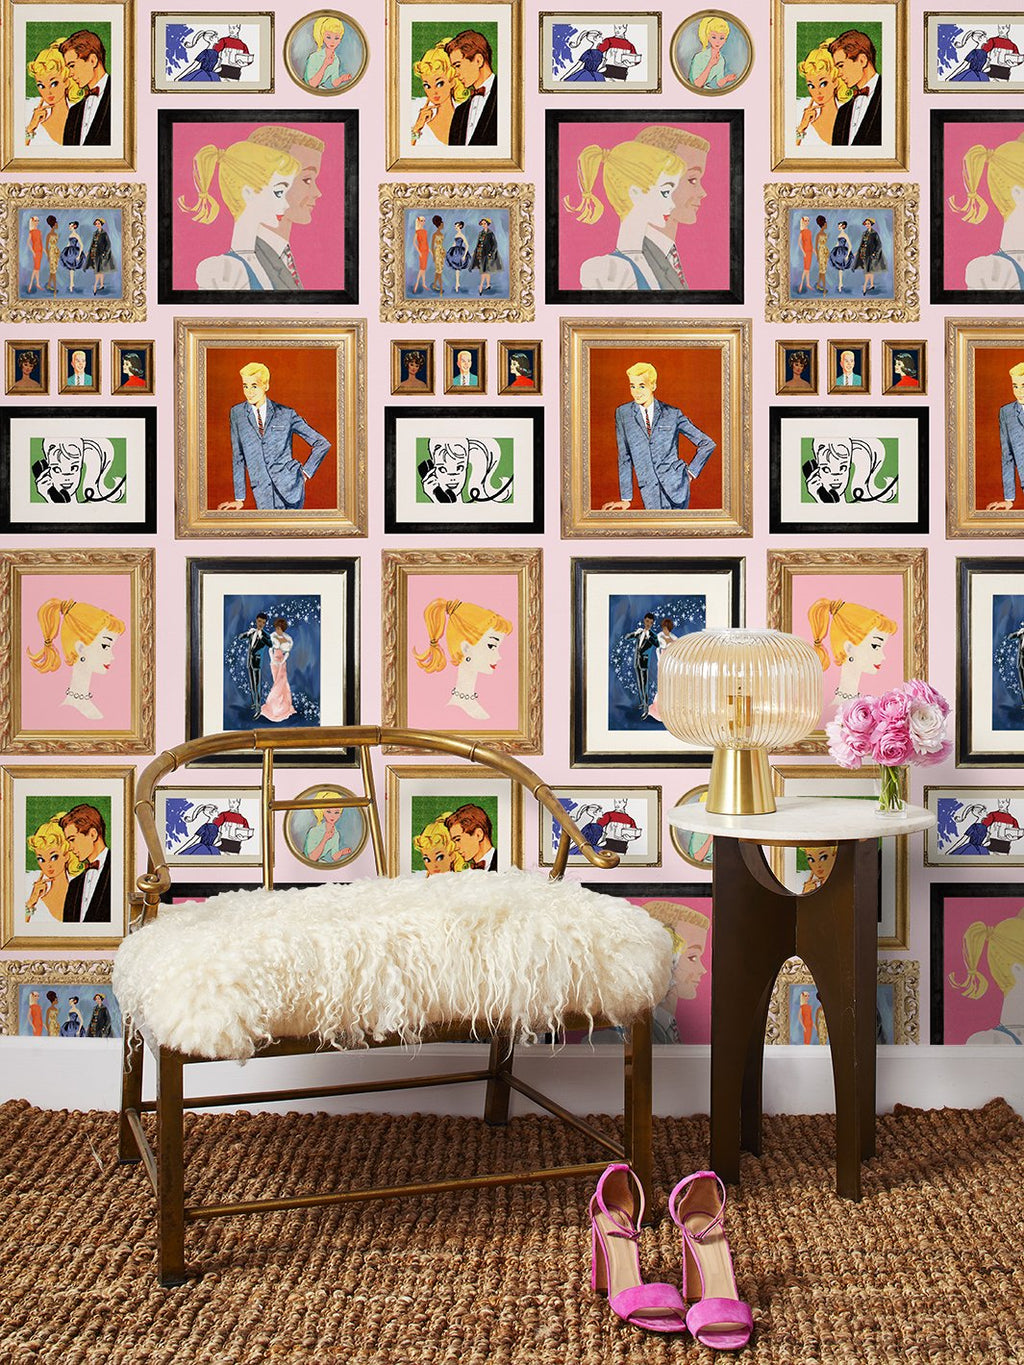 Gallery Walls Illustrated' Wallpaper by Barbie™ - Pink